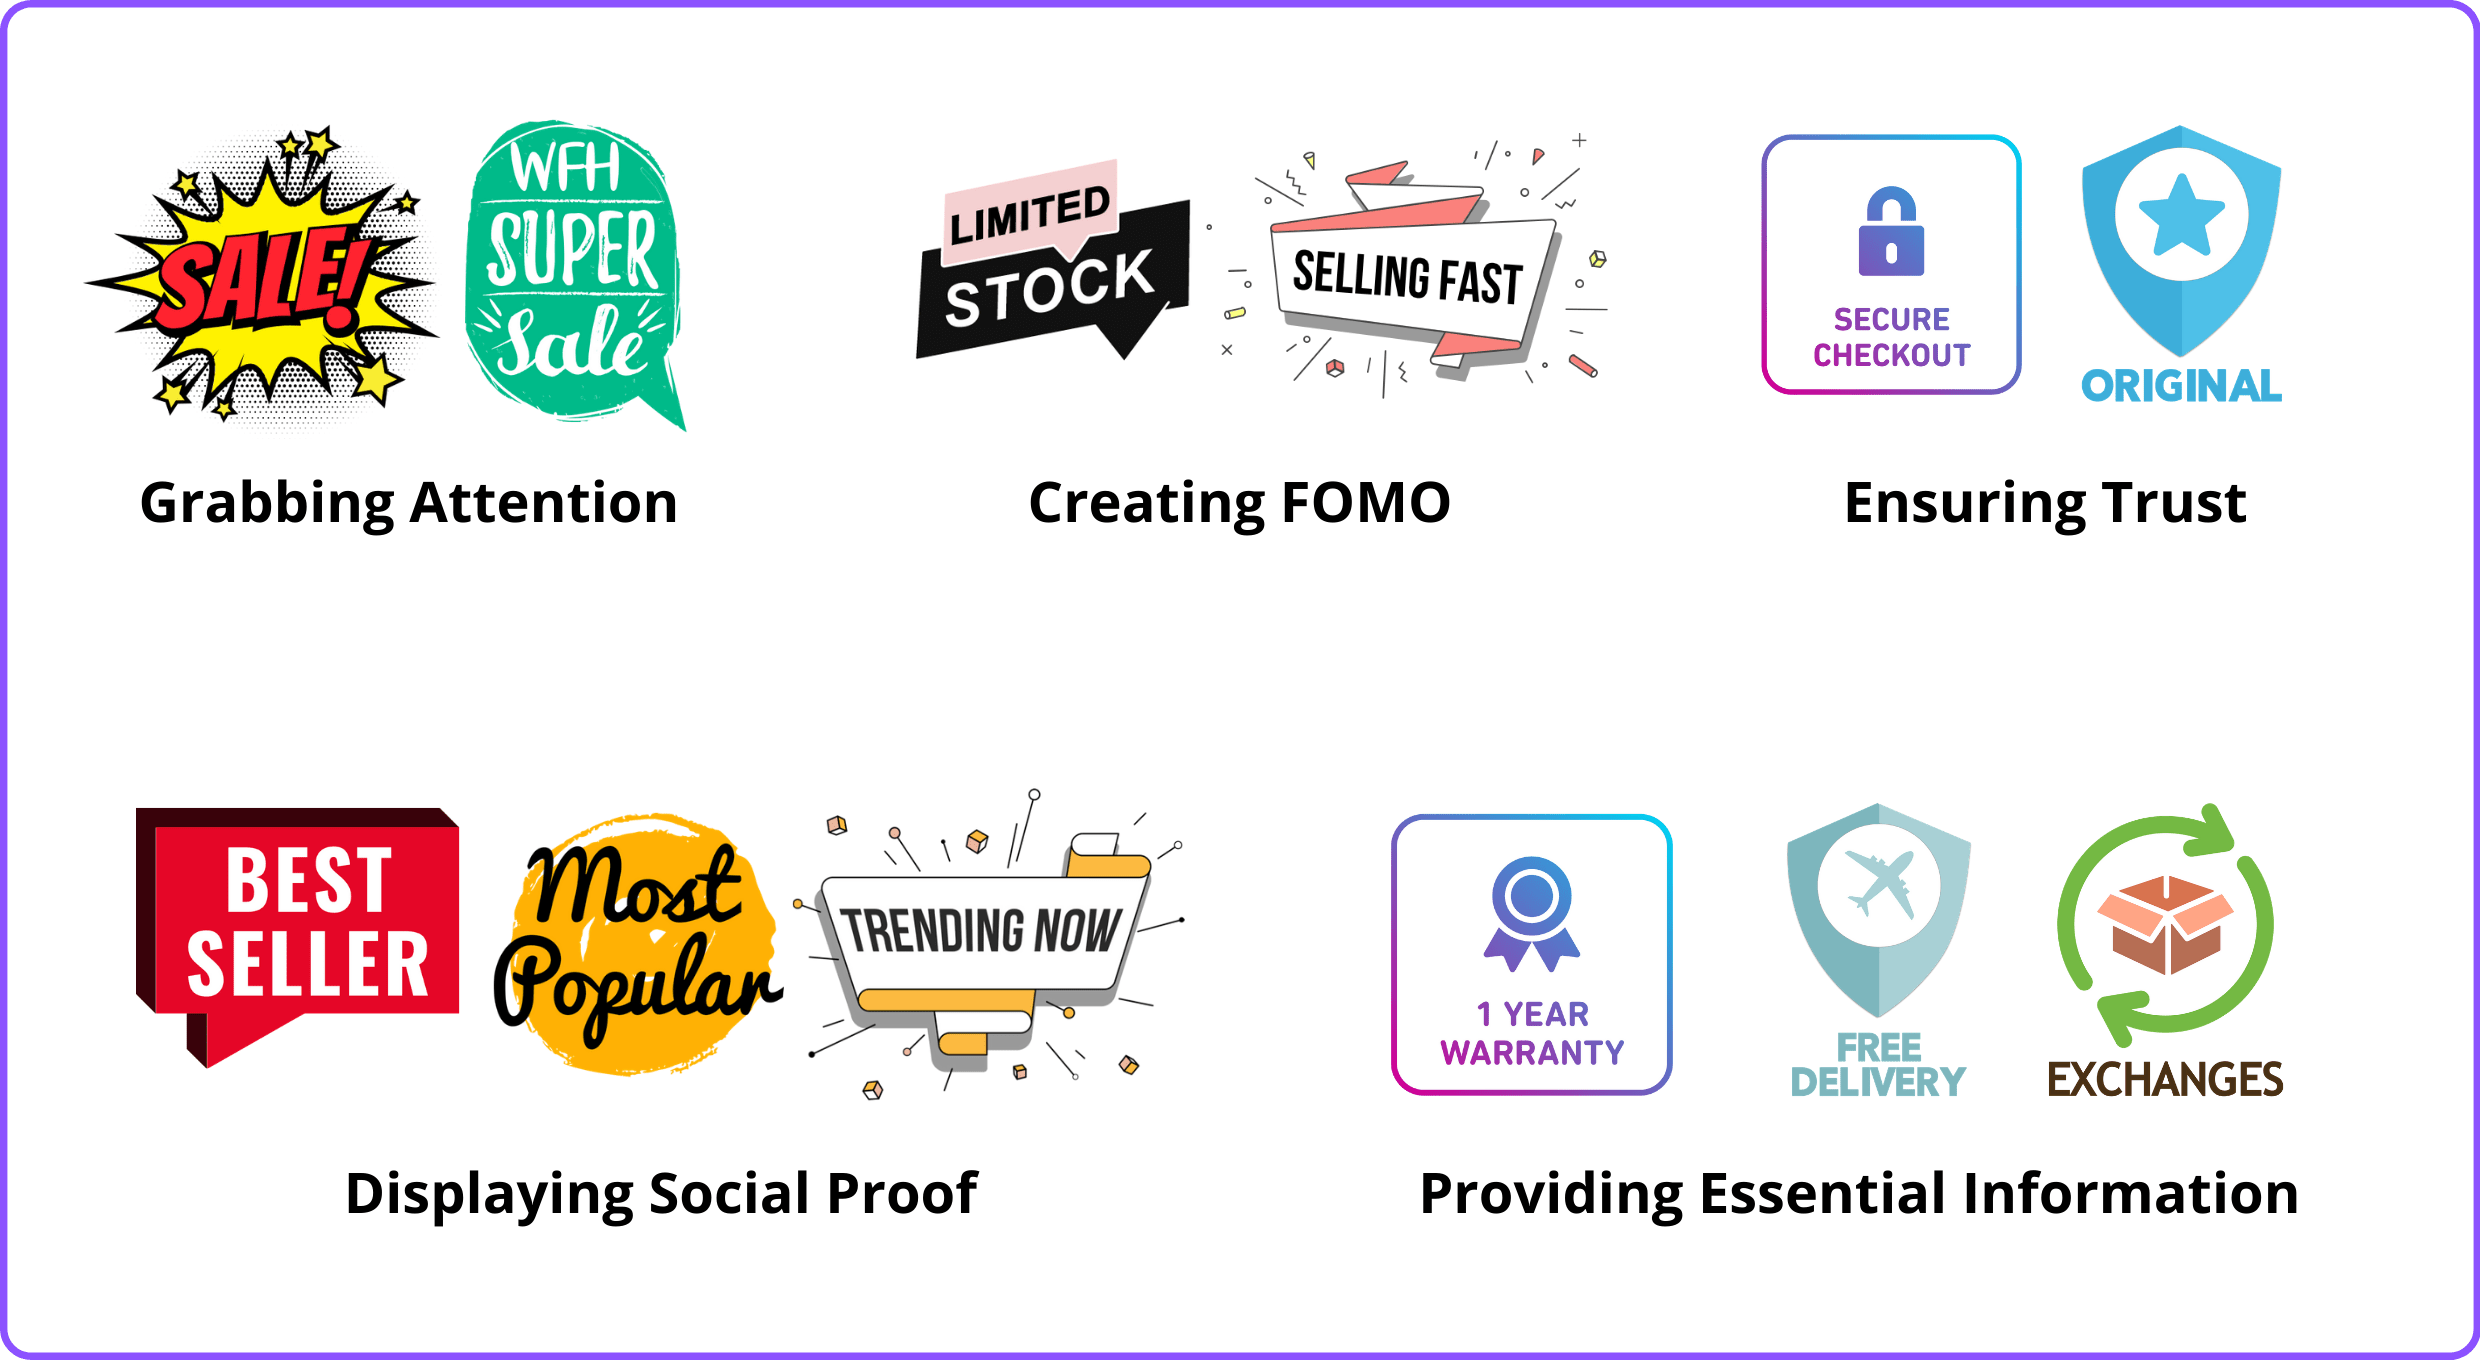 Examples of ModeMagic badges that provide shopping cues